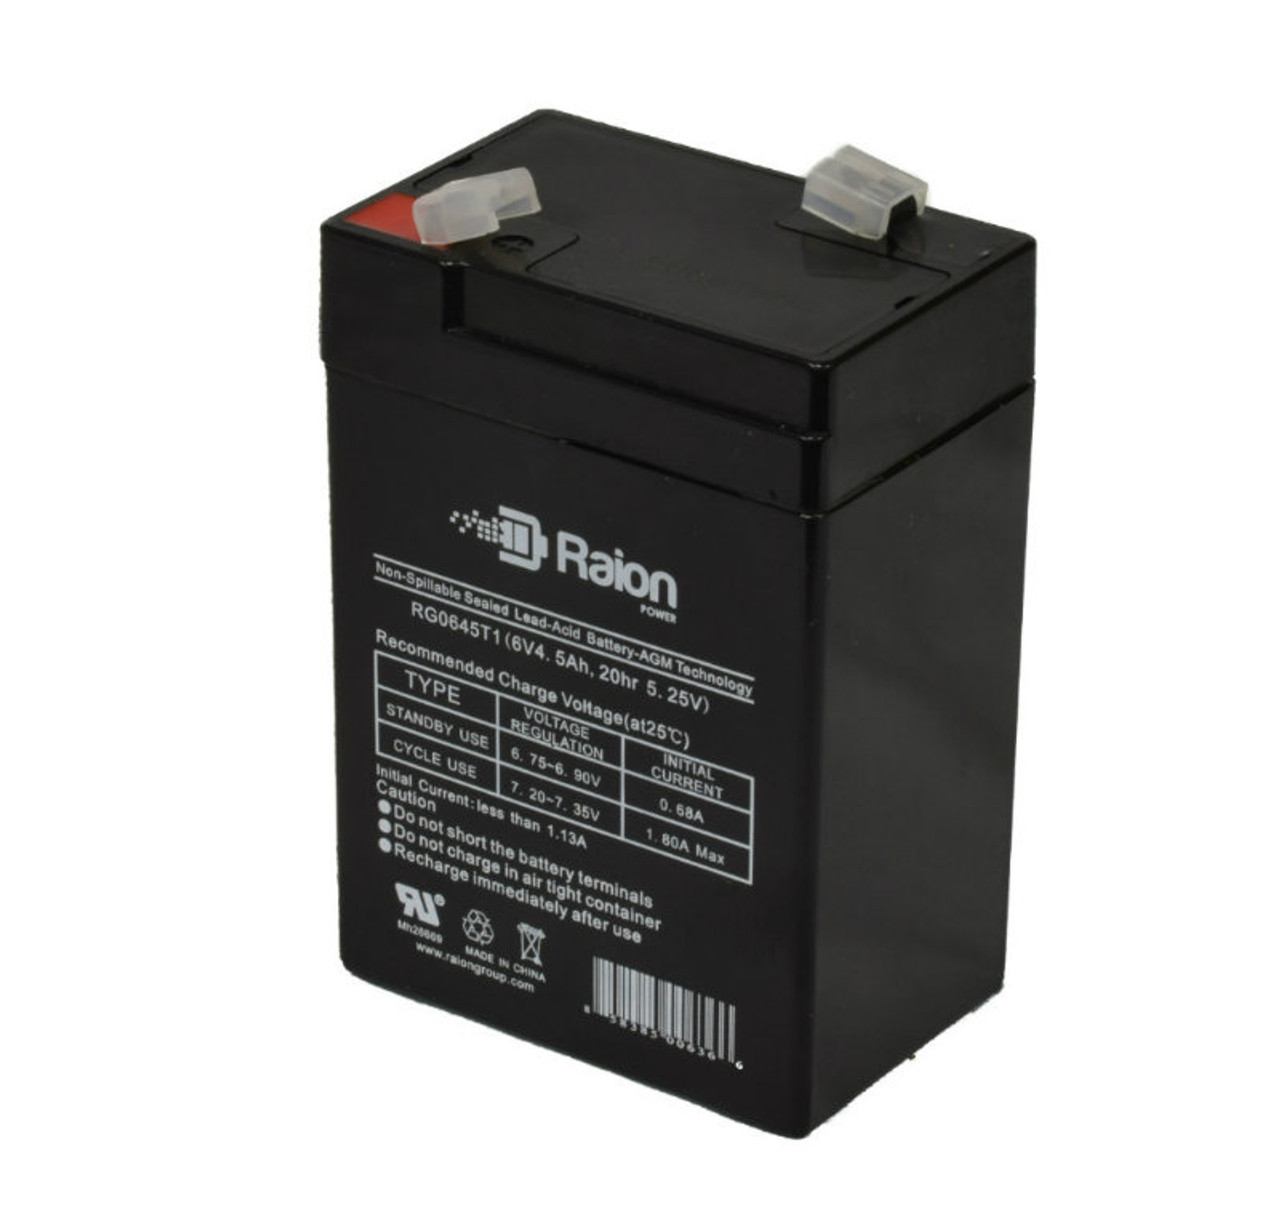 Raion Power RG0645T1 6V 4.5Ah Replacement Battery Cartridge for Kaufel 2027